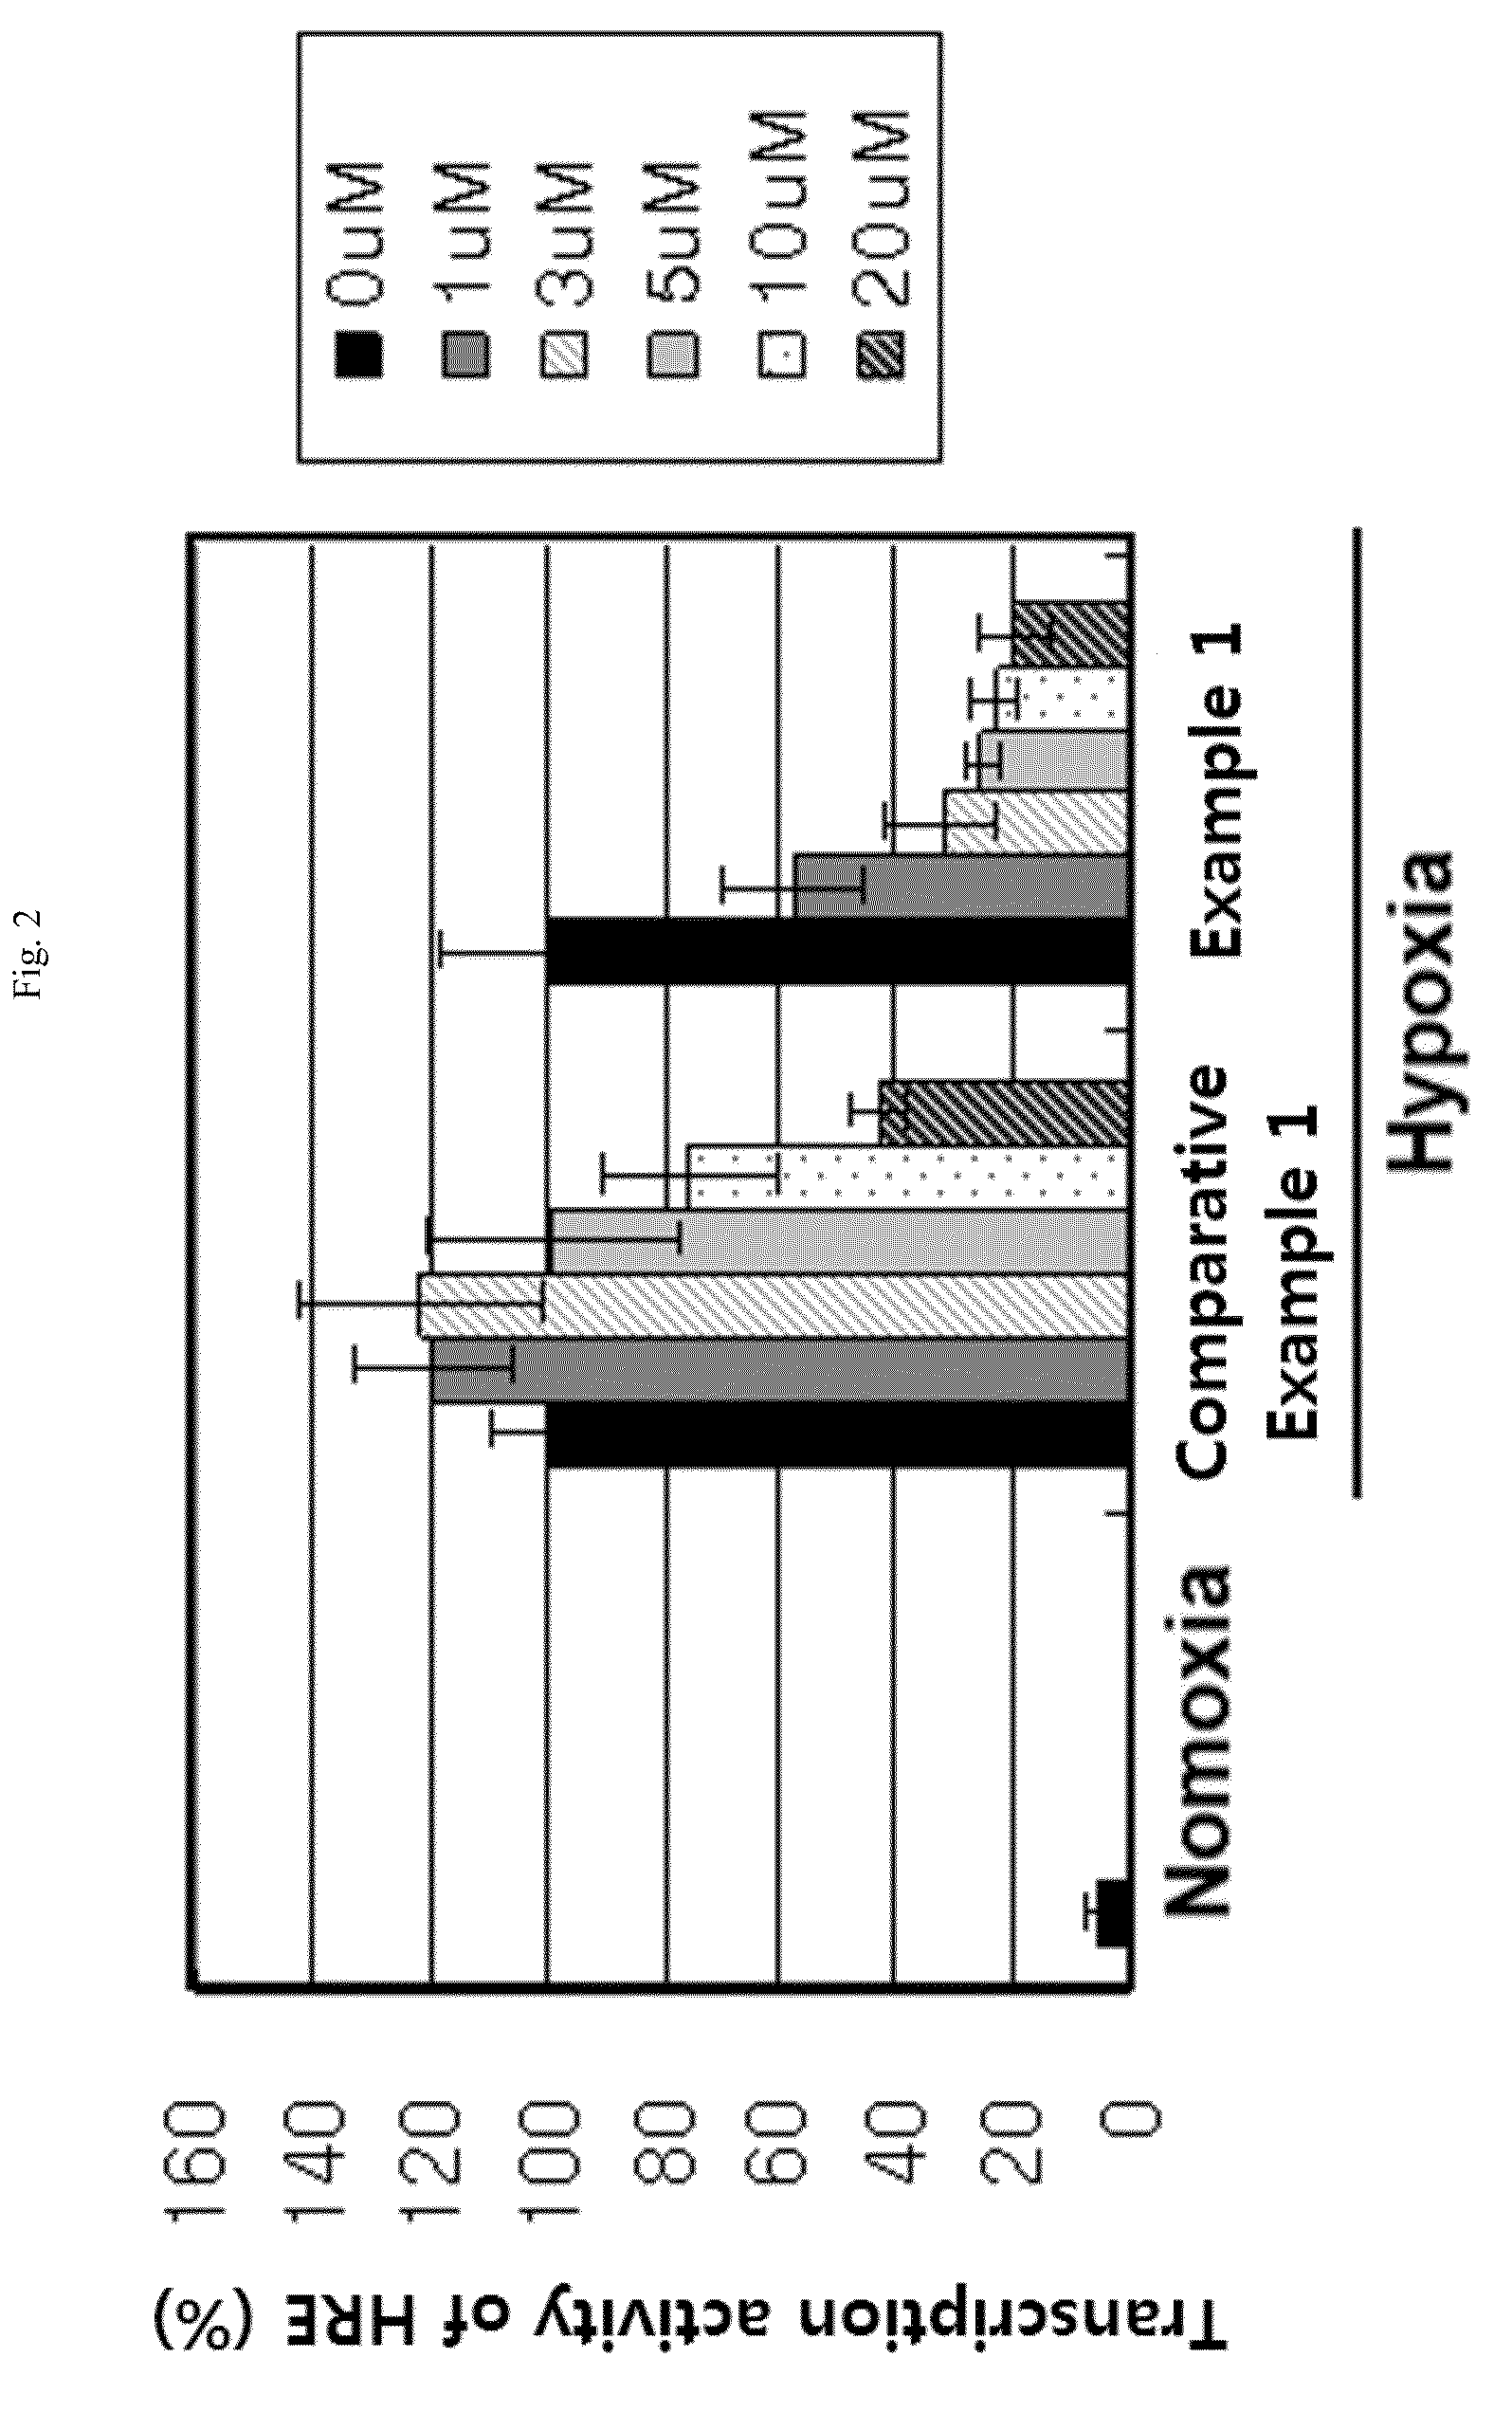 Aryloxy phenoxy acrylic compound having HIF-1 inhibition activity, method for preparing same, and pharmaceutical composition containing same as an active ingredient